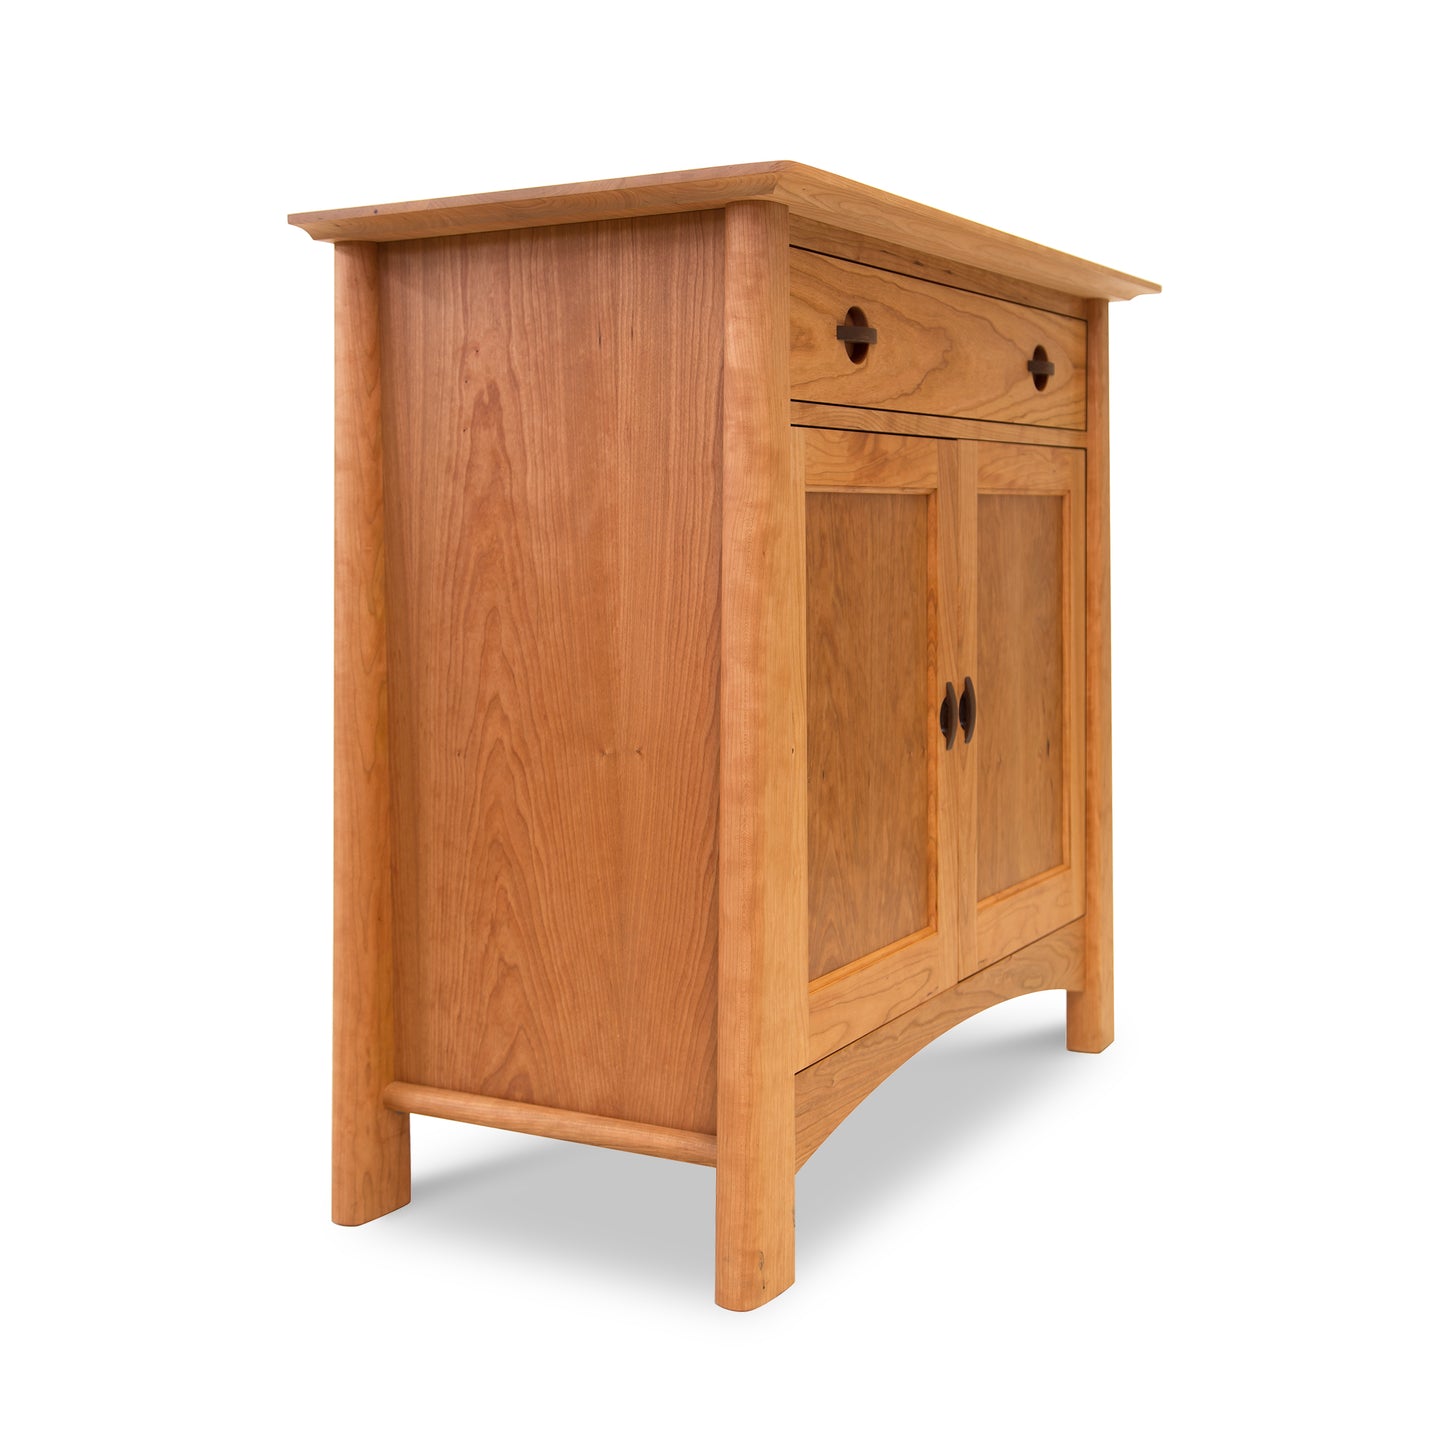 A Cherry Moon Small 38" Sideboard by Maple Corner Woodworks, with a small drawer on top and two doors below, featuring round black handles and standing upright against a white background.